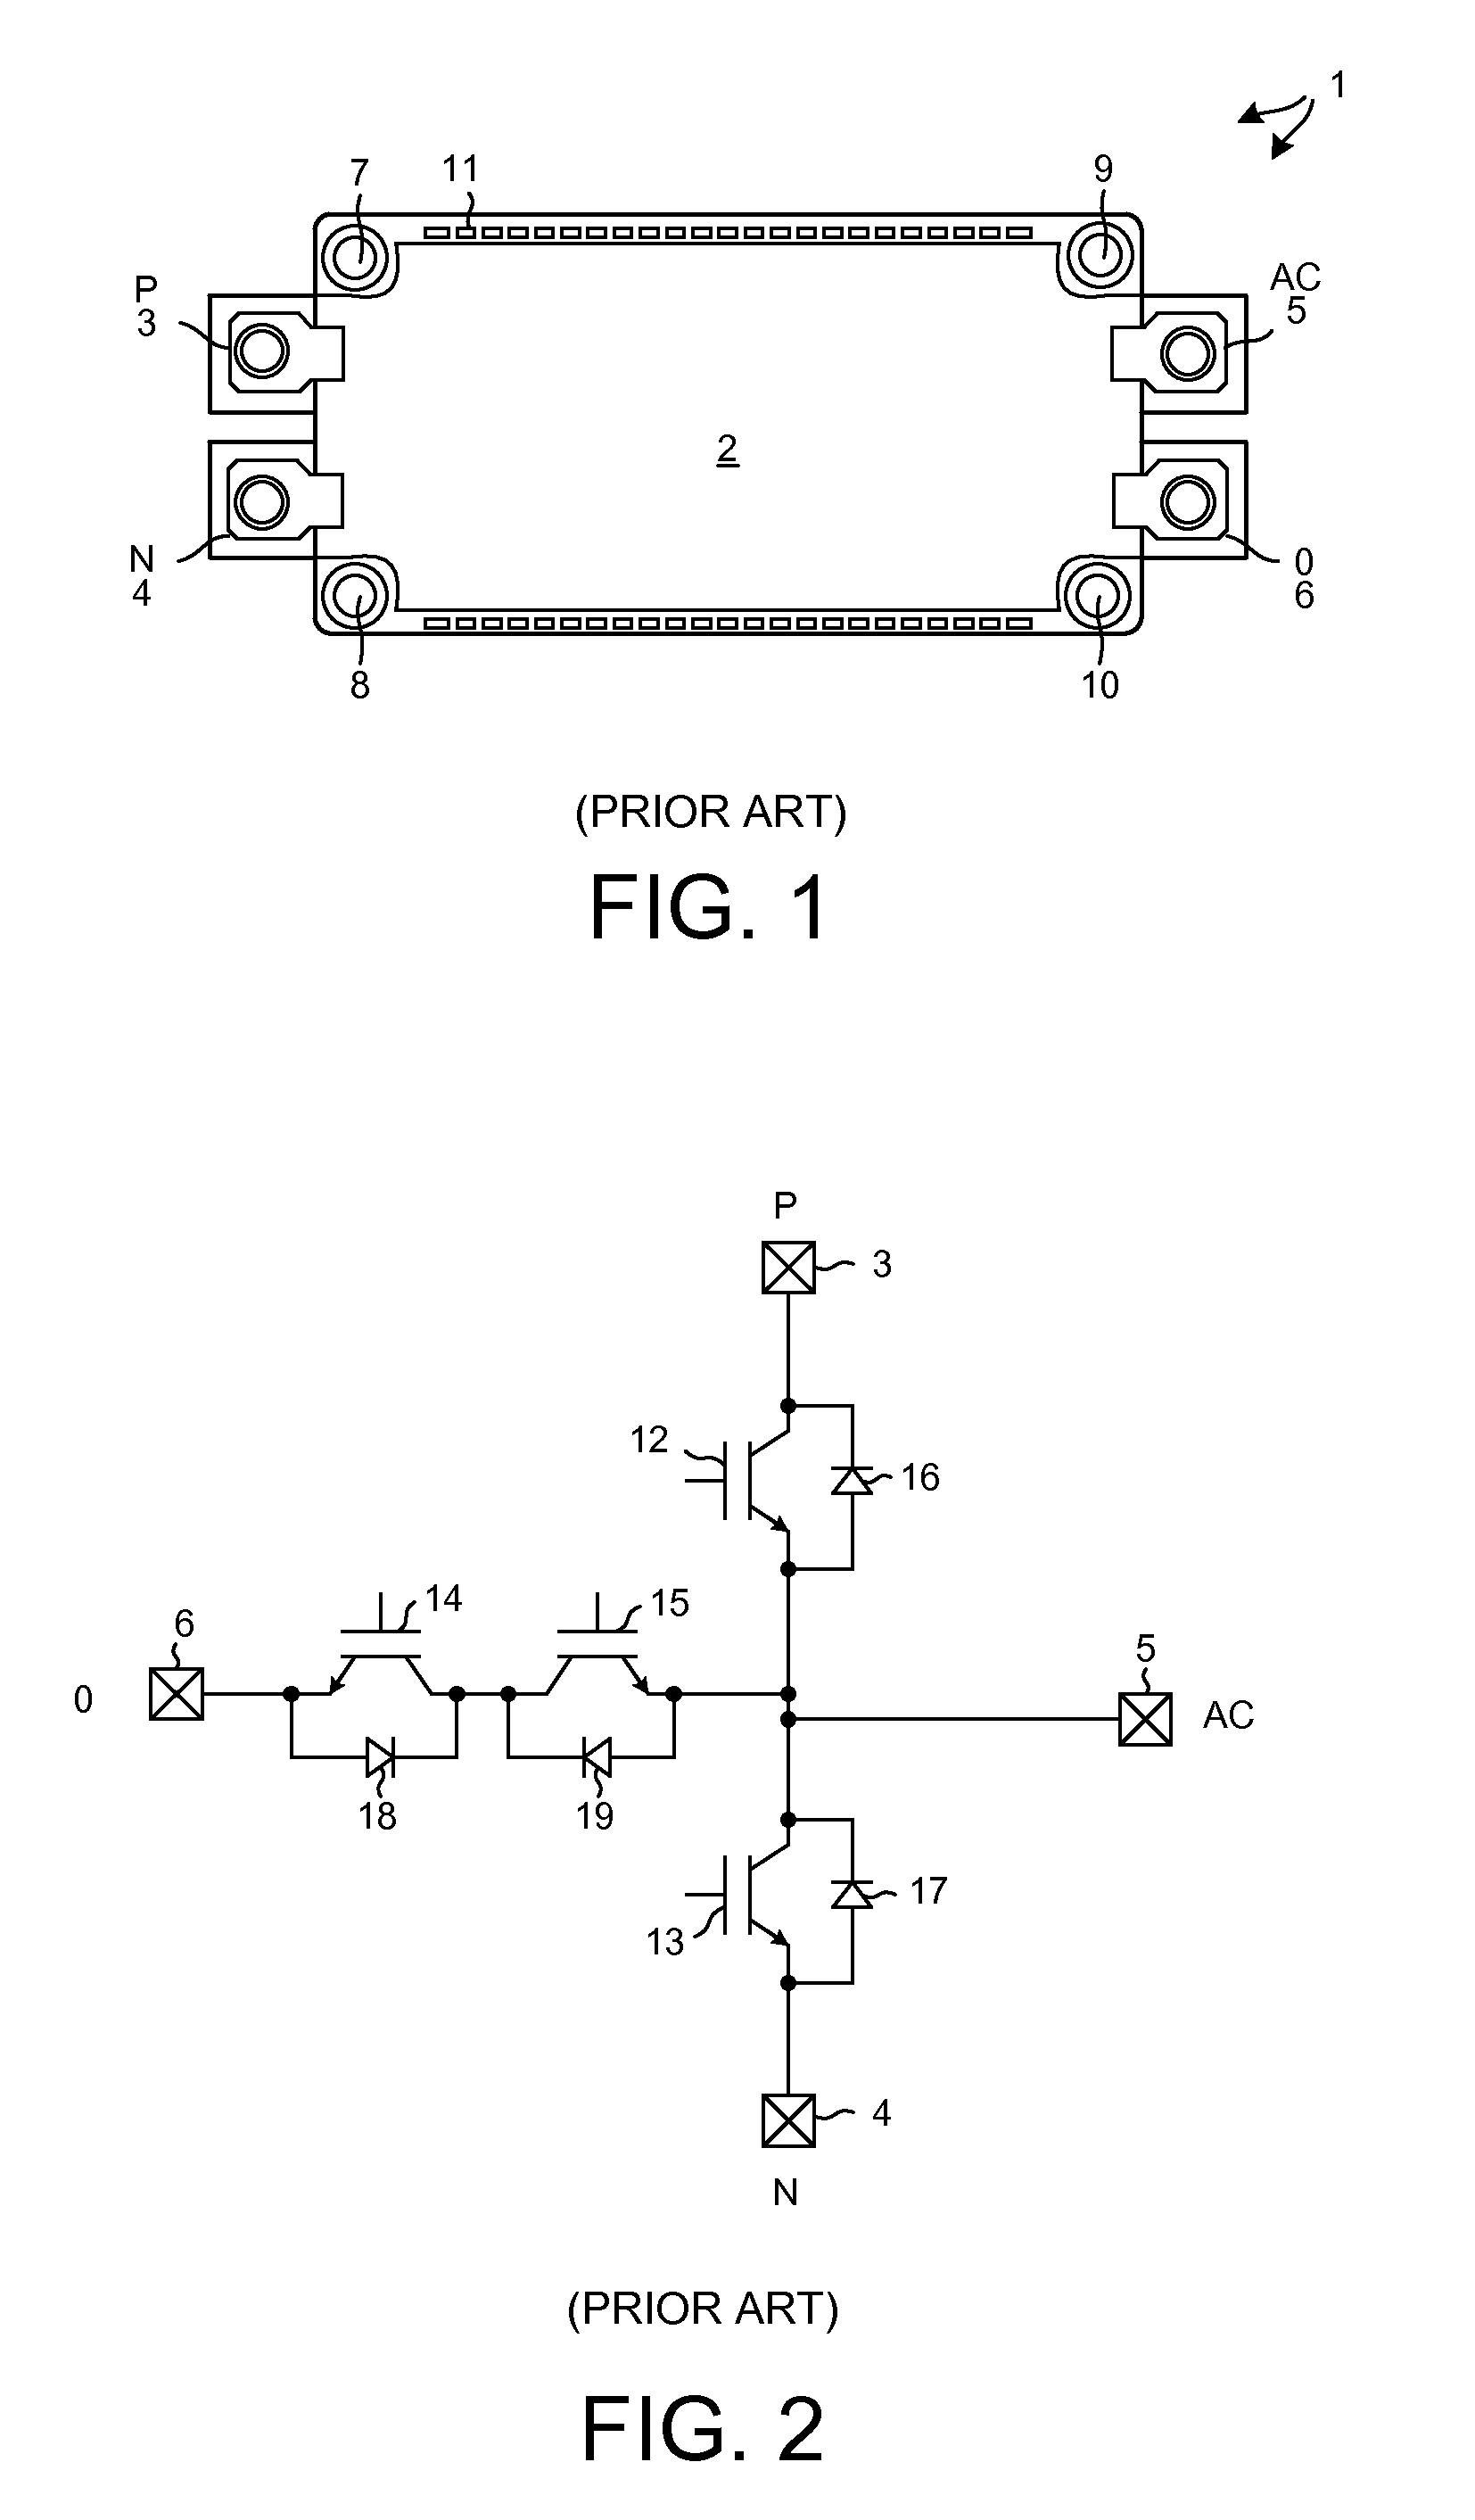 Module and assembly with dual DC-links for three-level NPC applications